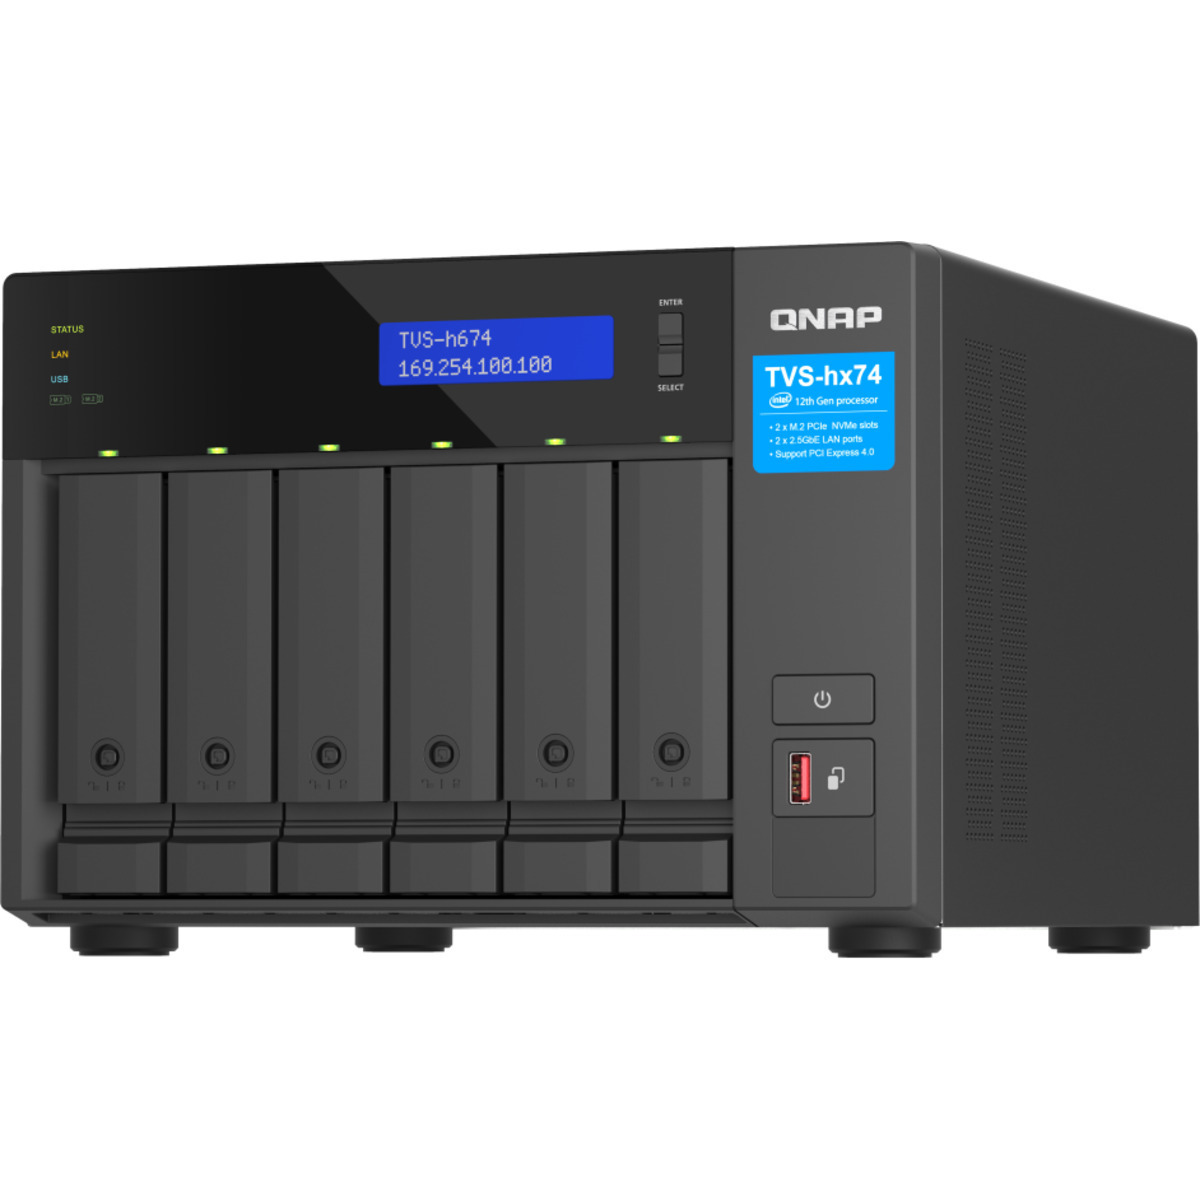 QNAP TVS-h674 Core i3 6tb 6-Bay Desktop Multimedia / Power User / Business NAS - Network Attached Storage Device 6x1tb Crucial MX500 CT1000MX500SSD1 2.5 560/510MB/s SATA 6Gb/s SSD CONSUMER Class Drives Installed - Burn-In Tested TVS-h674 Core i3